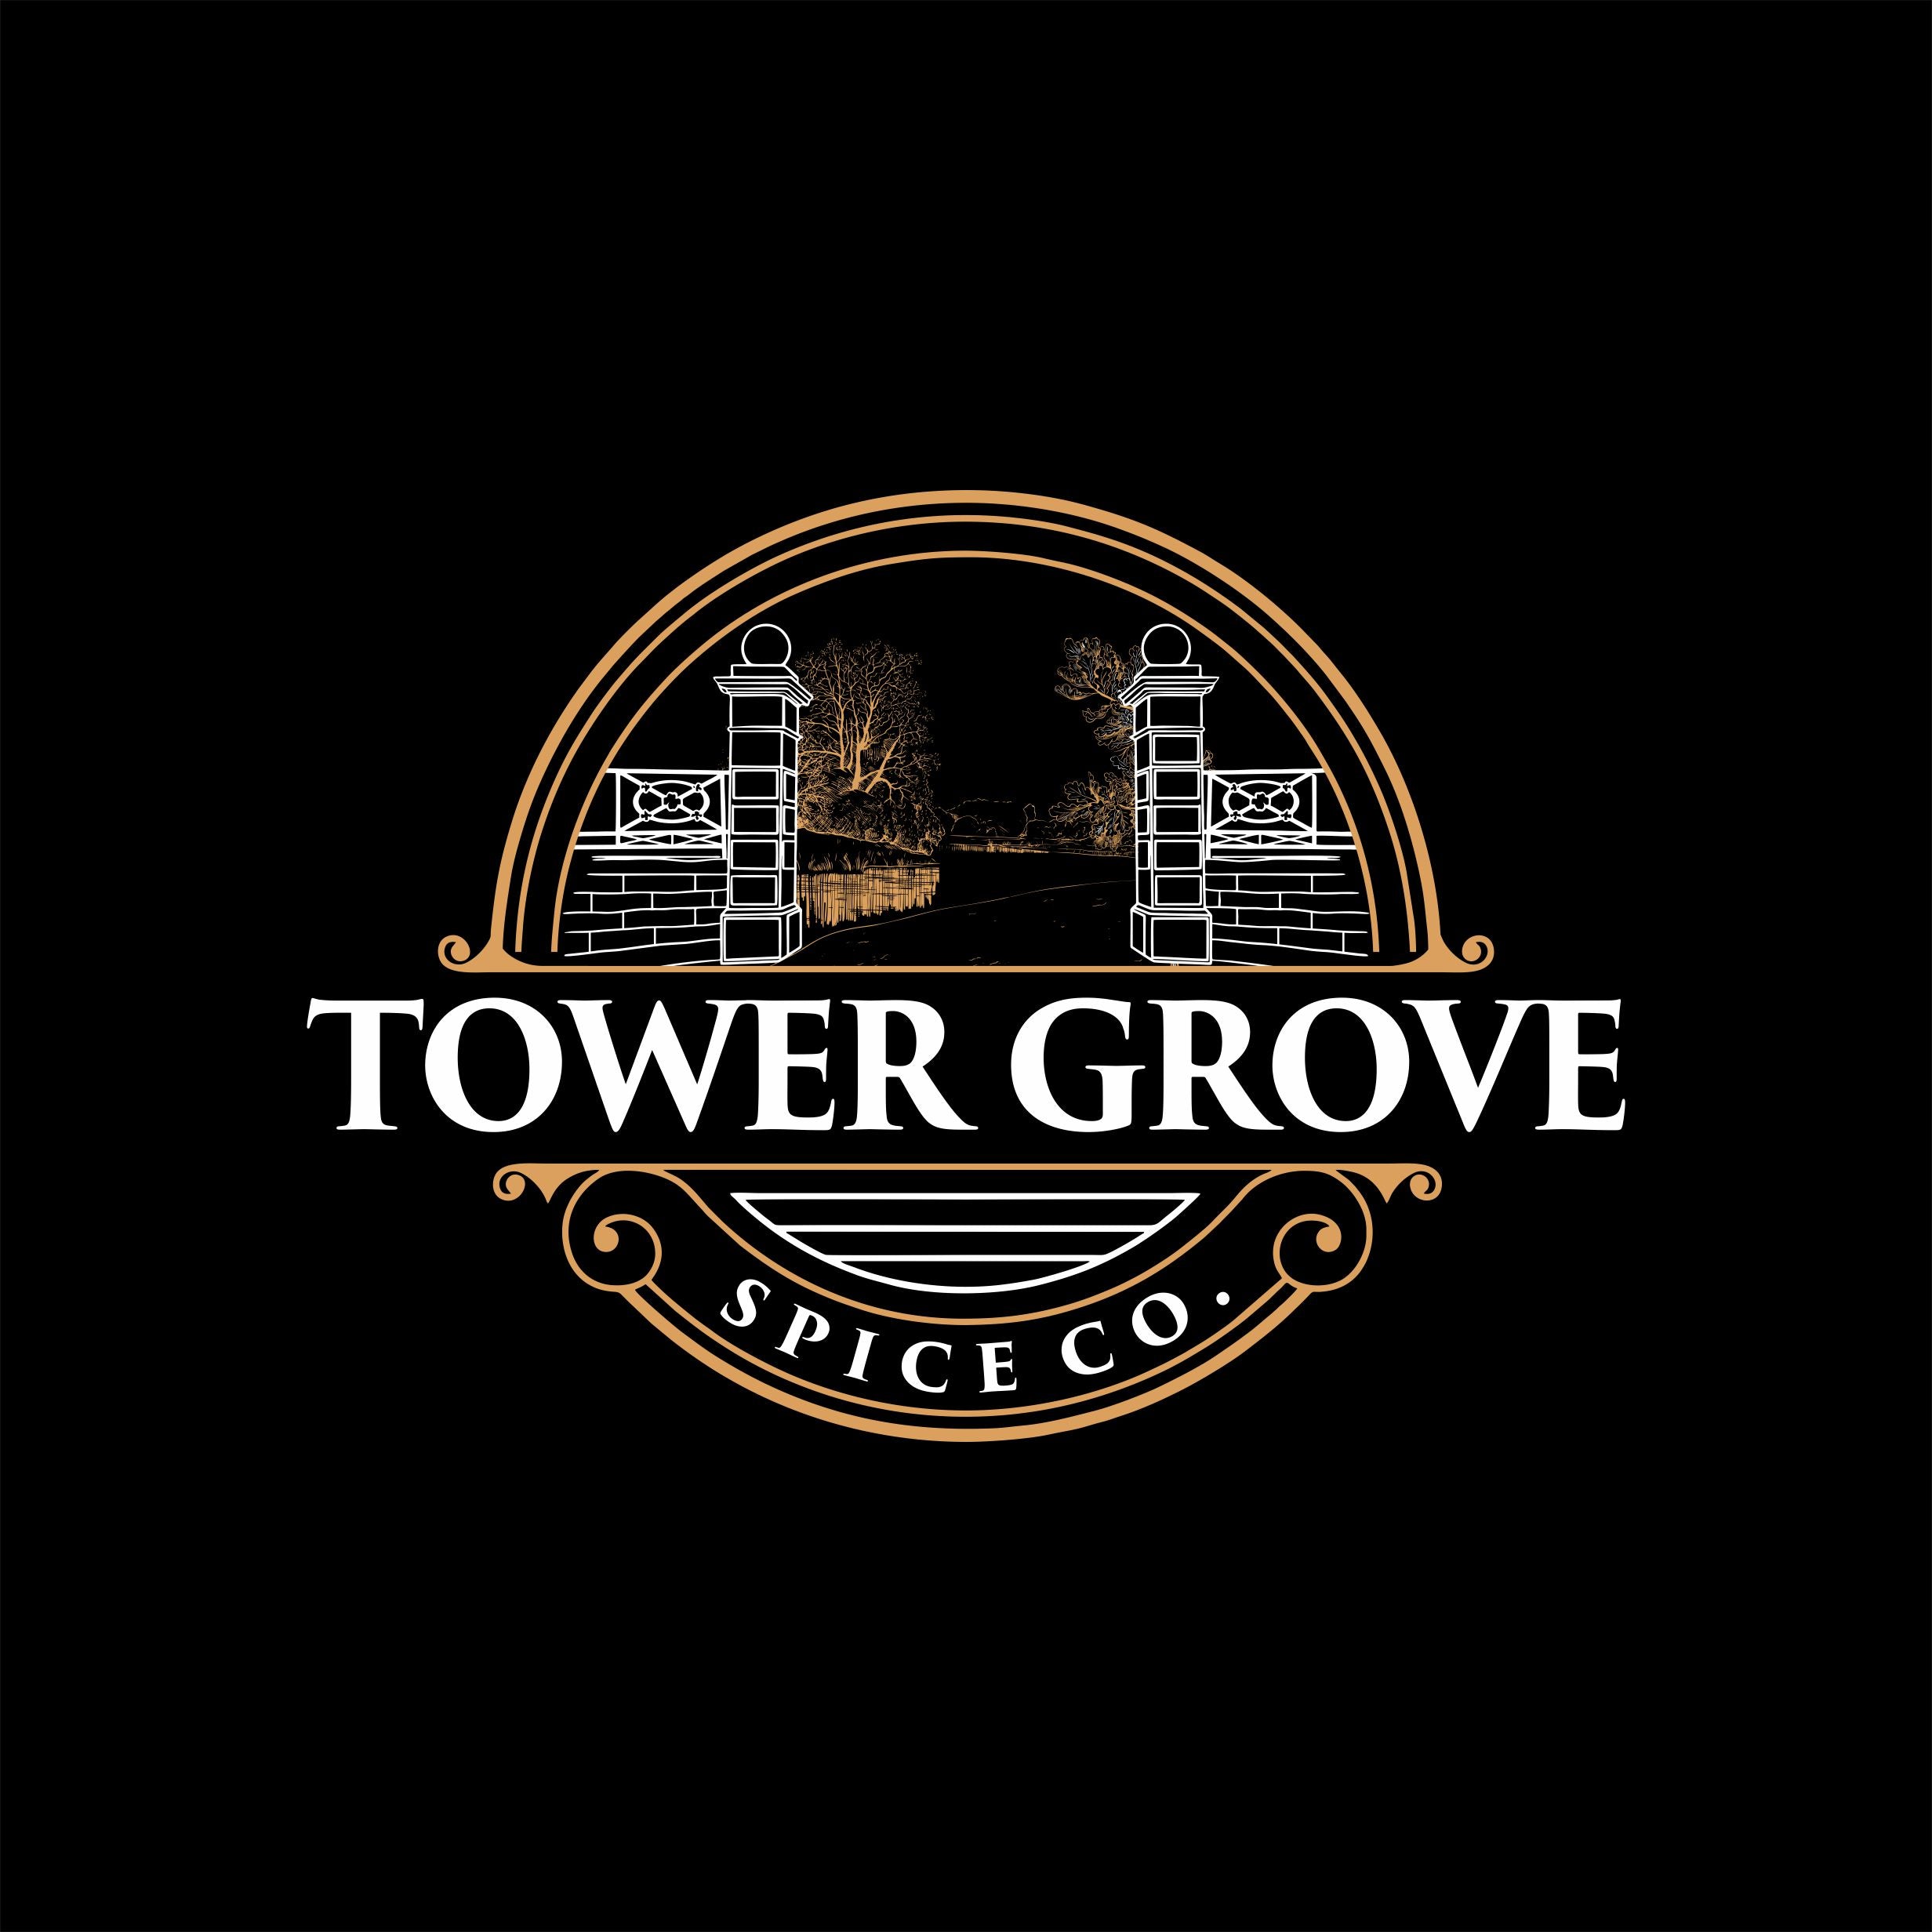 Tower Grove Spice Co